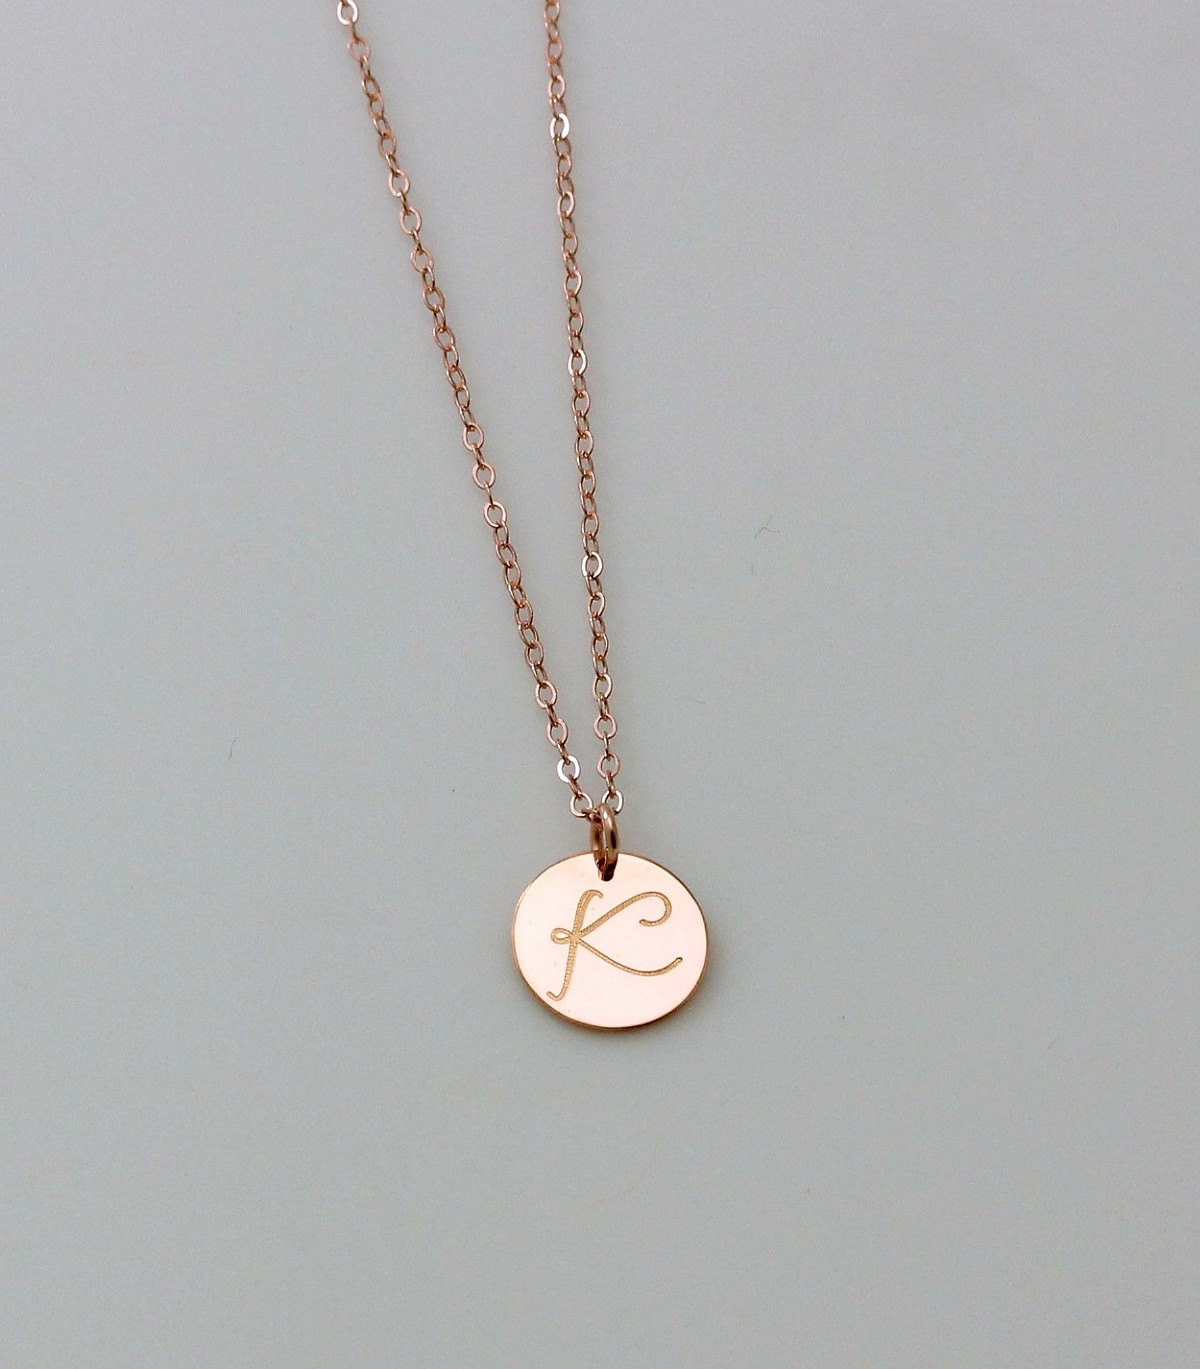 Rose Gold Monogram Necklace
 Personalized Circle Necklace Rose Gold Initial Necklace